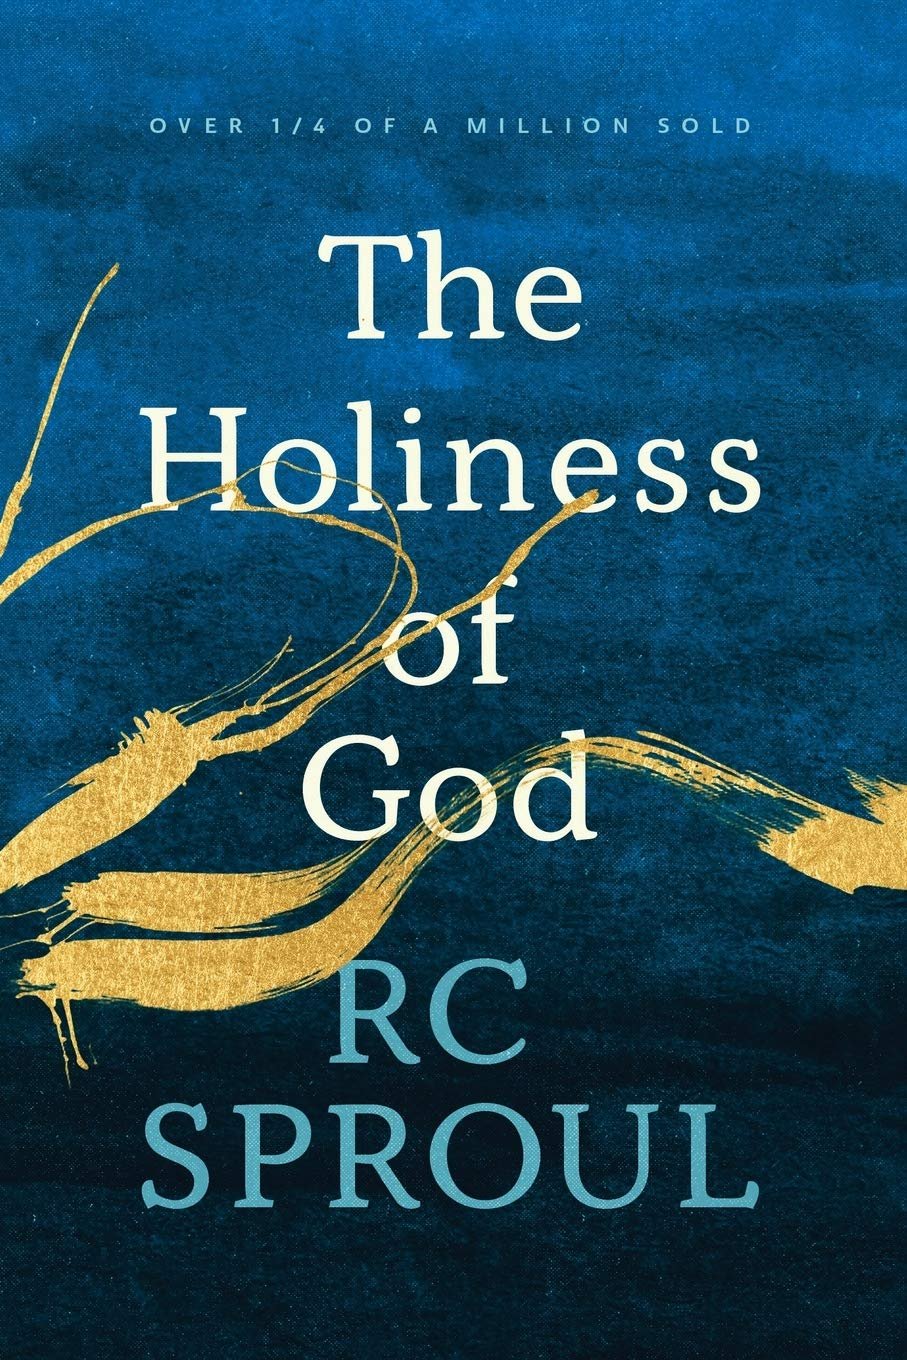 The Holiness of God by R. C. Sproul